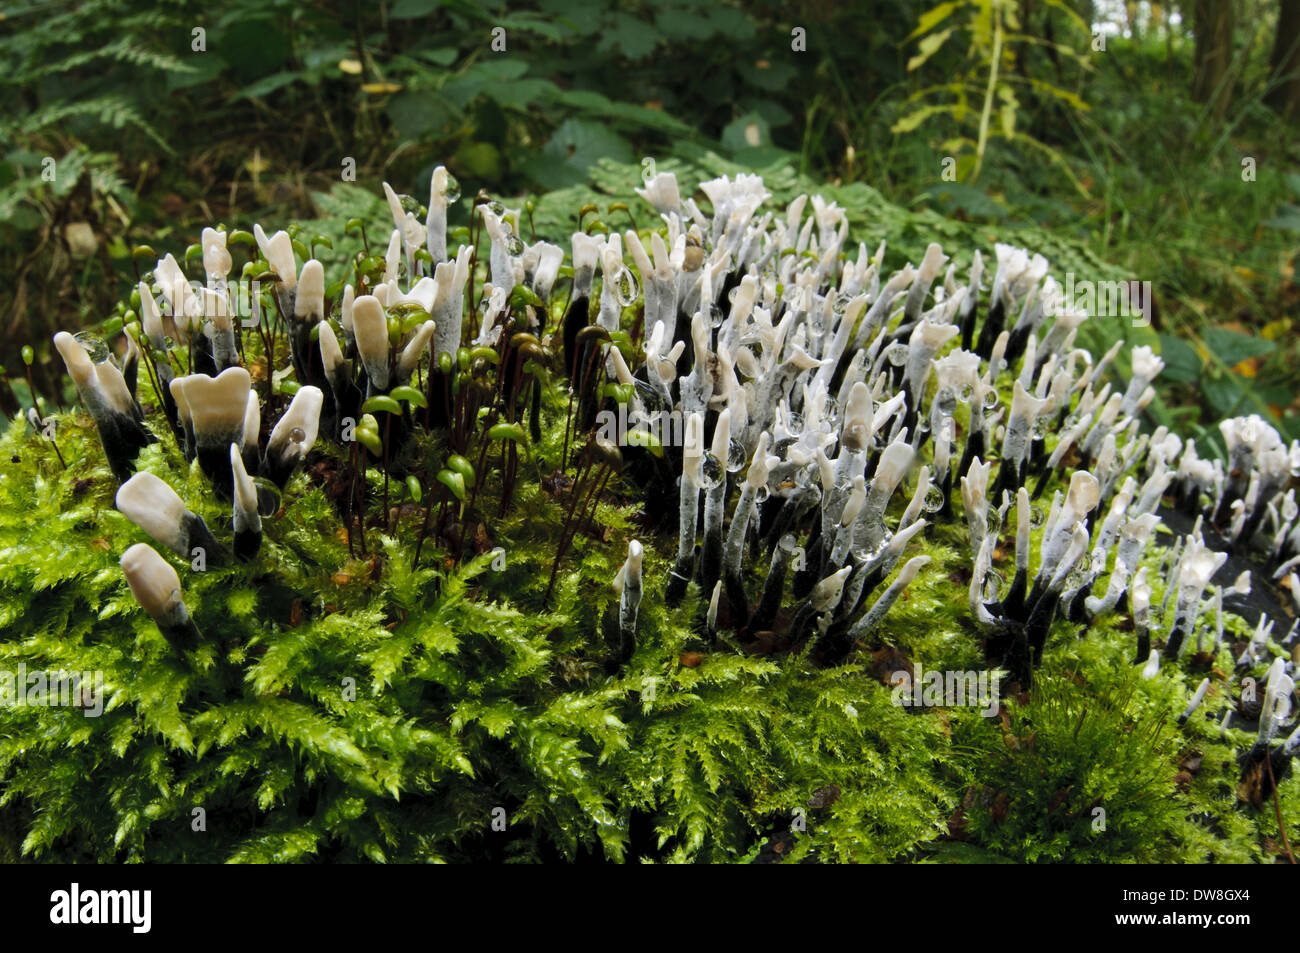 Candle-snuff Fungus (Xylaria hypoxylon) fruiting bodies group growing on moss covered rotting wood Potteric Carr Nature Reserve Stock Photo